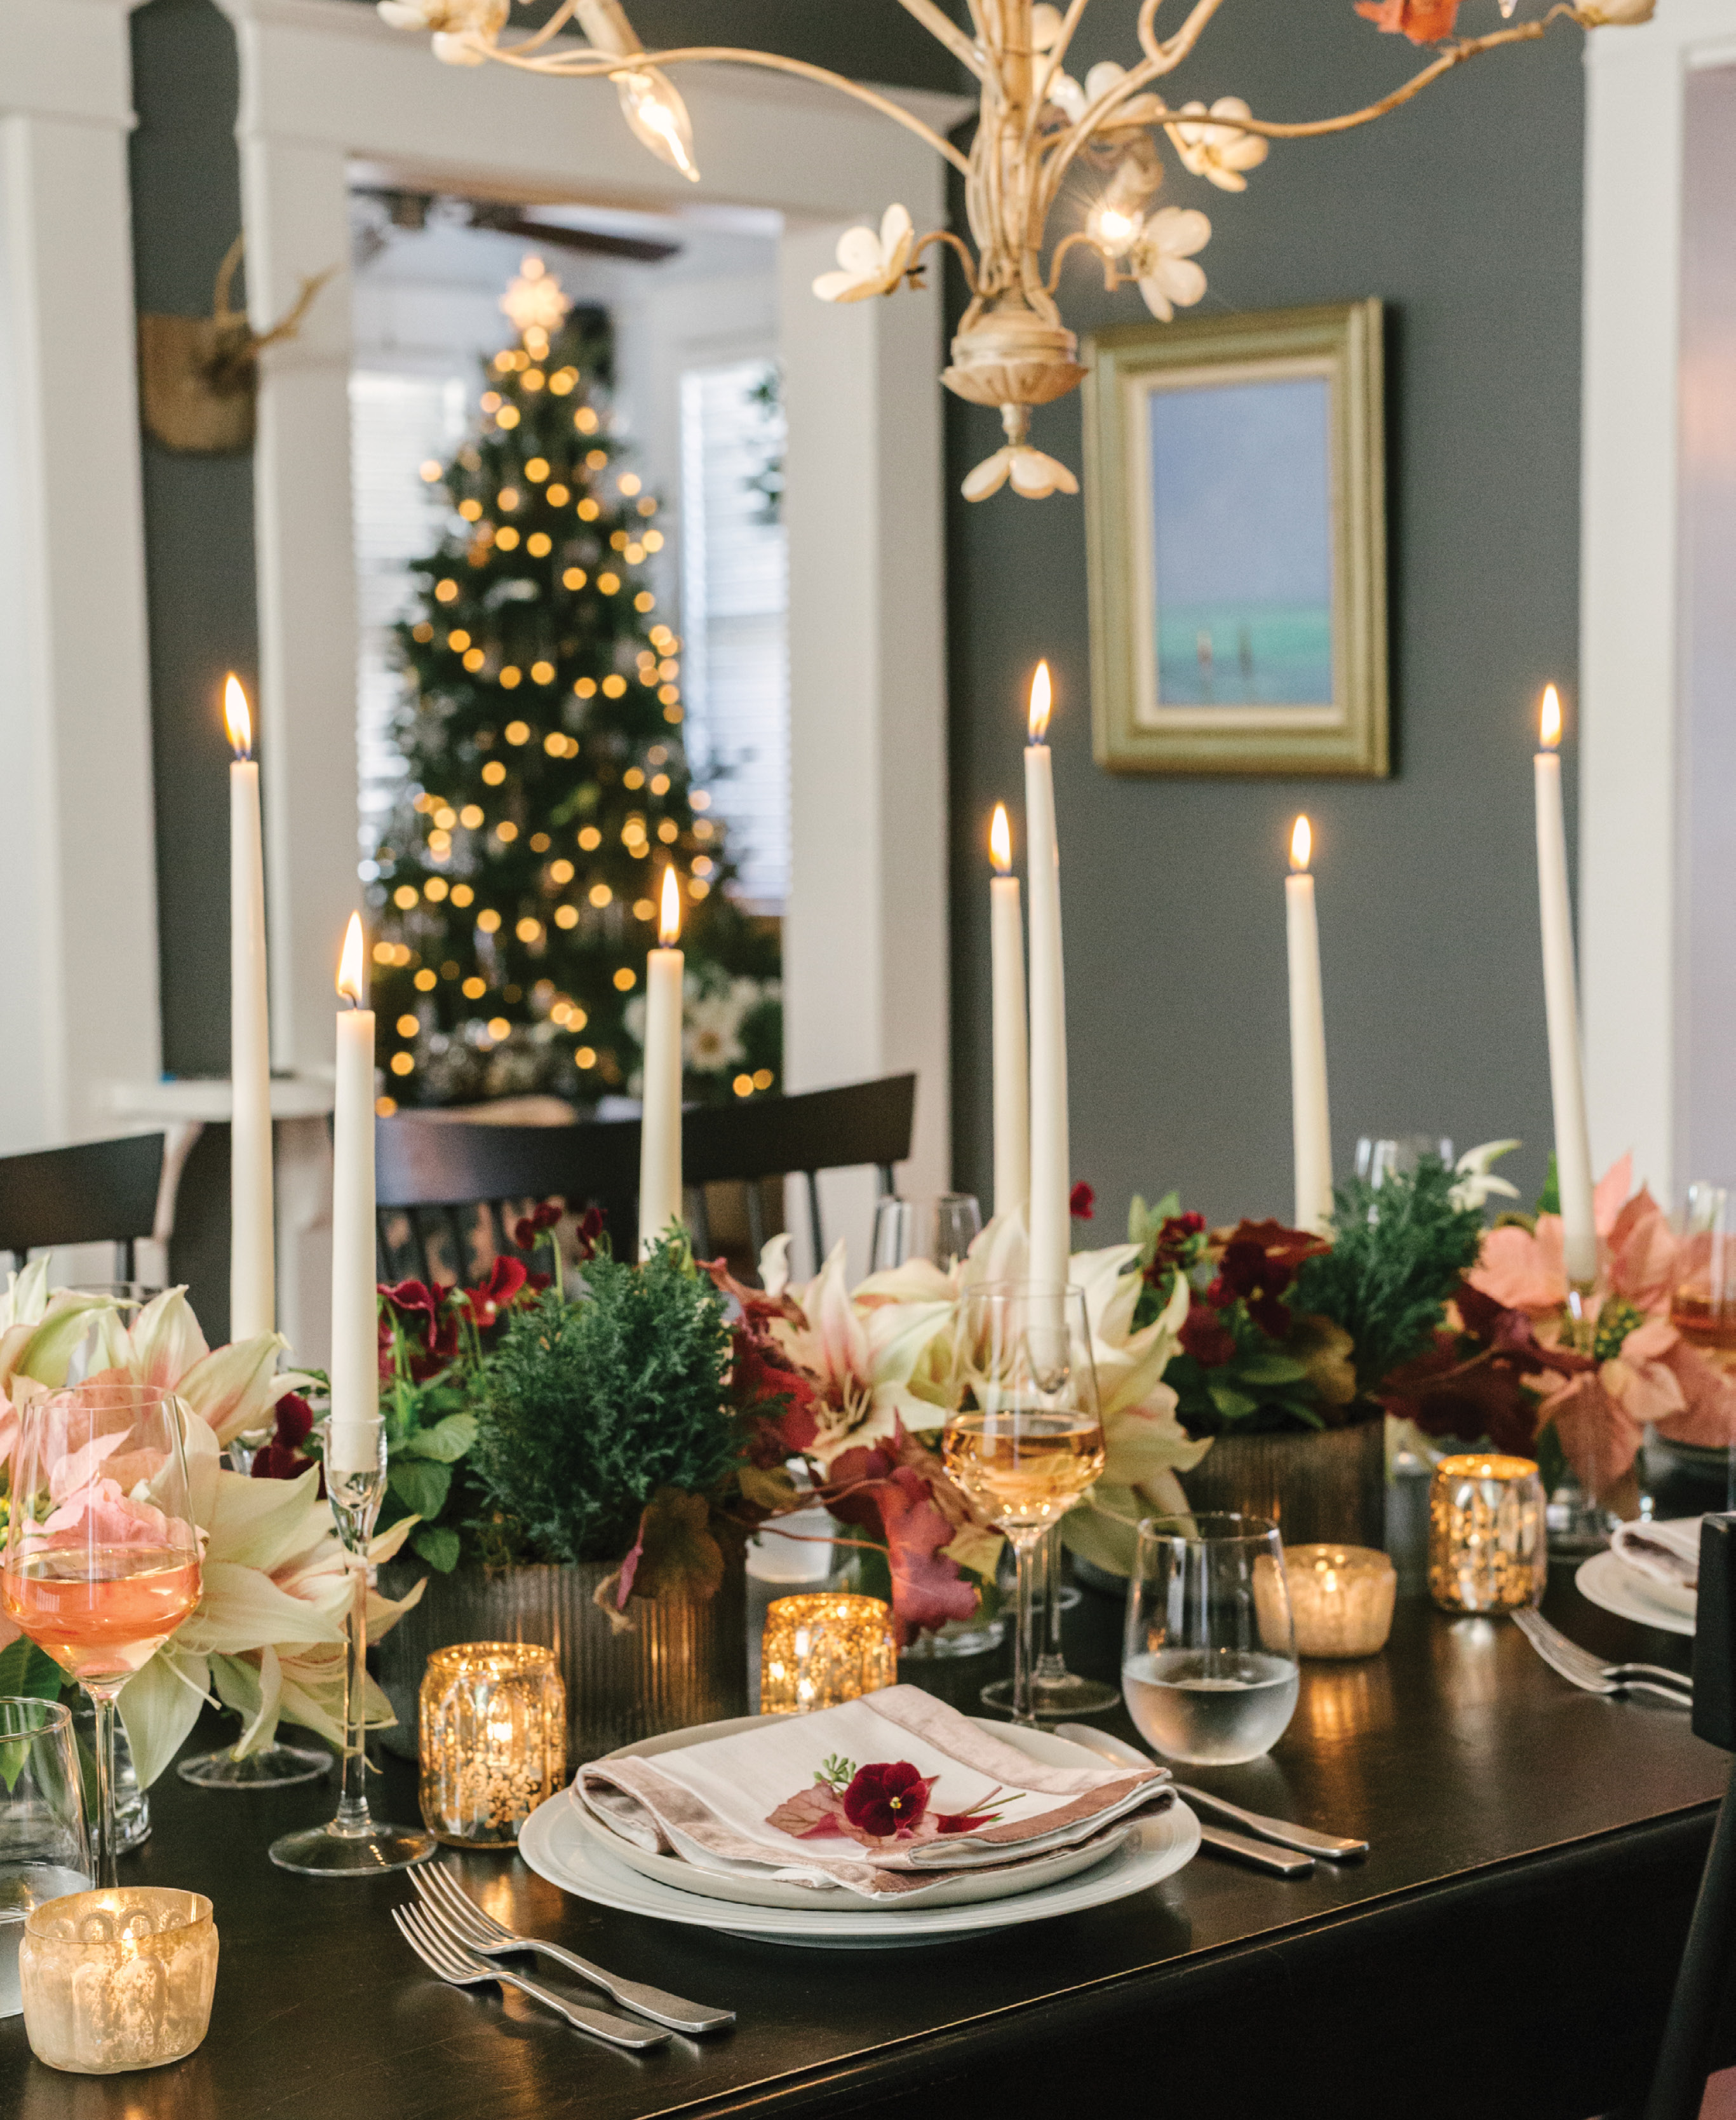 Tabletop Magic: The holidays also call for planning special meals and decking out dining spaces. Heather recommends working fresh florals and pops of color into your tablescape.